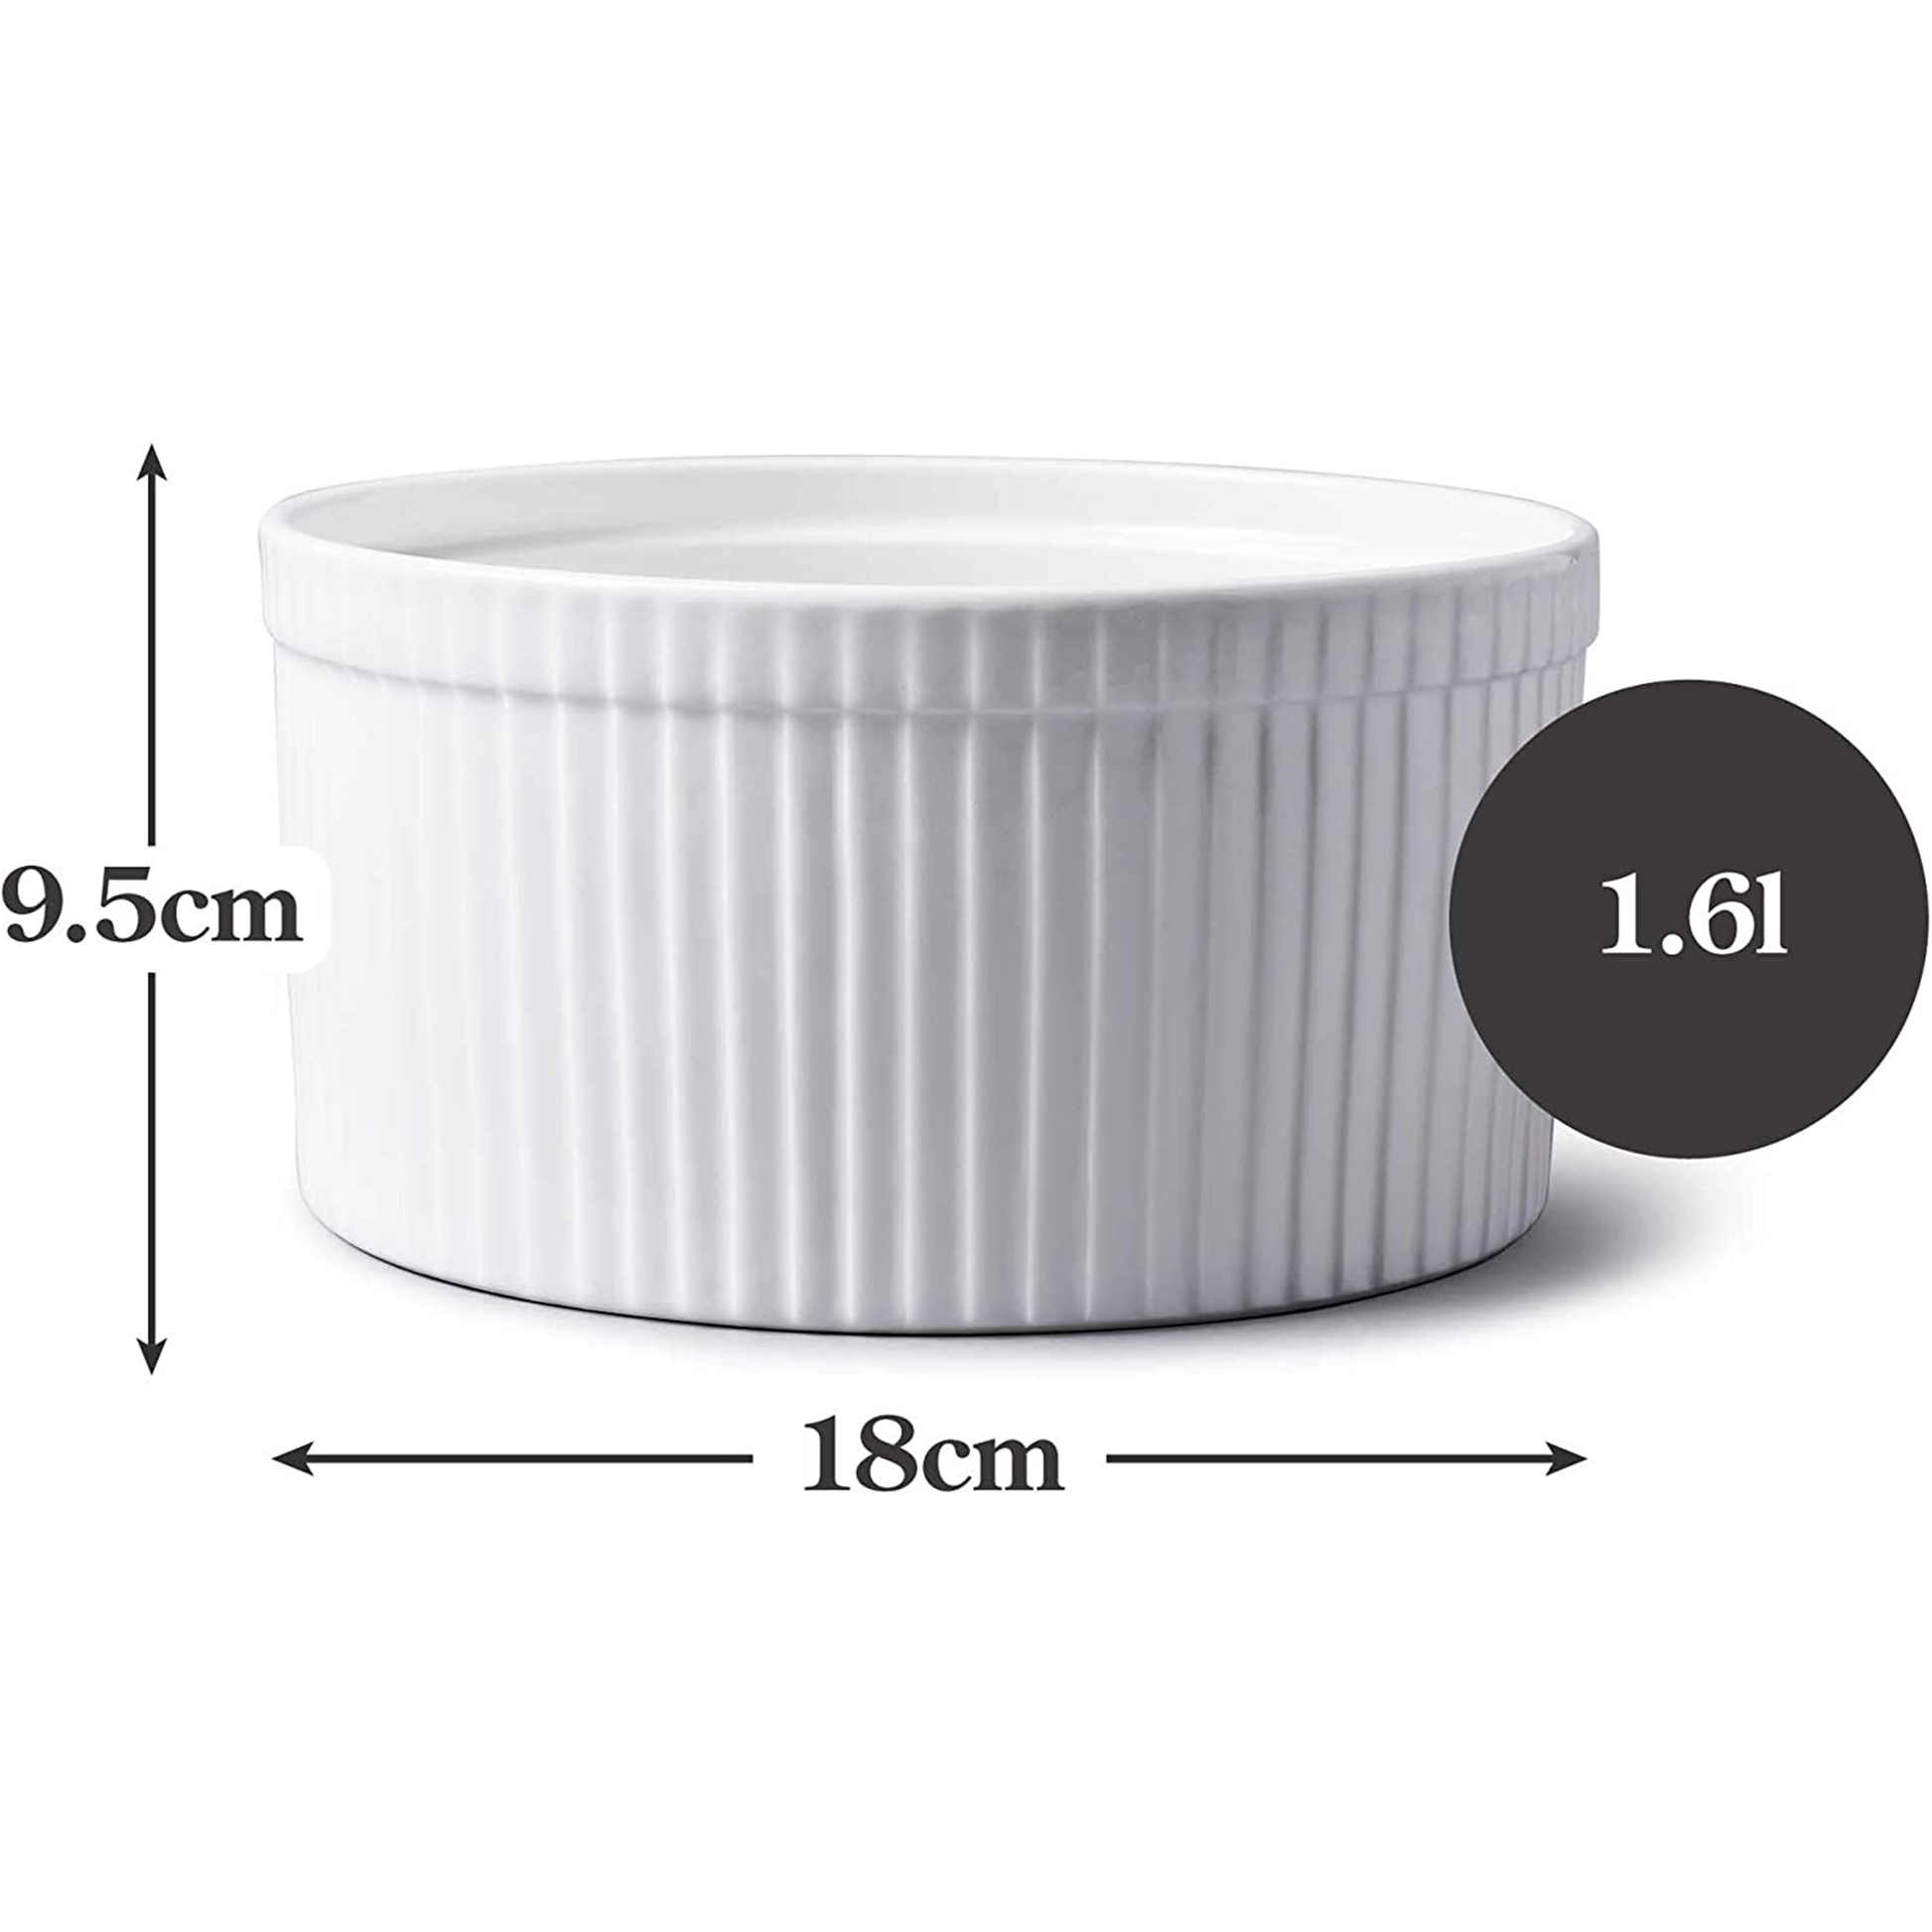 An image depicting the dimensions of the ramekin